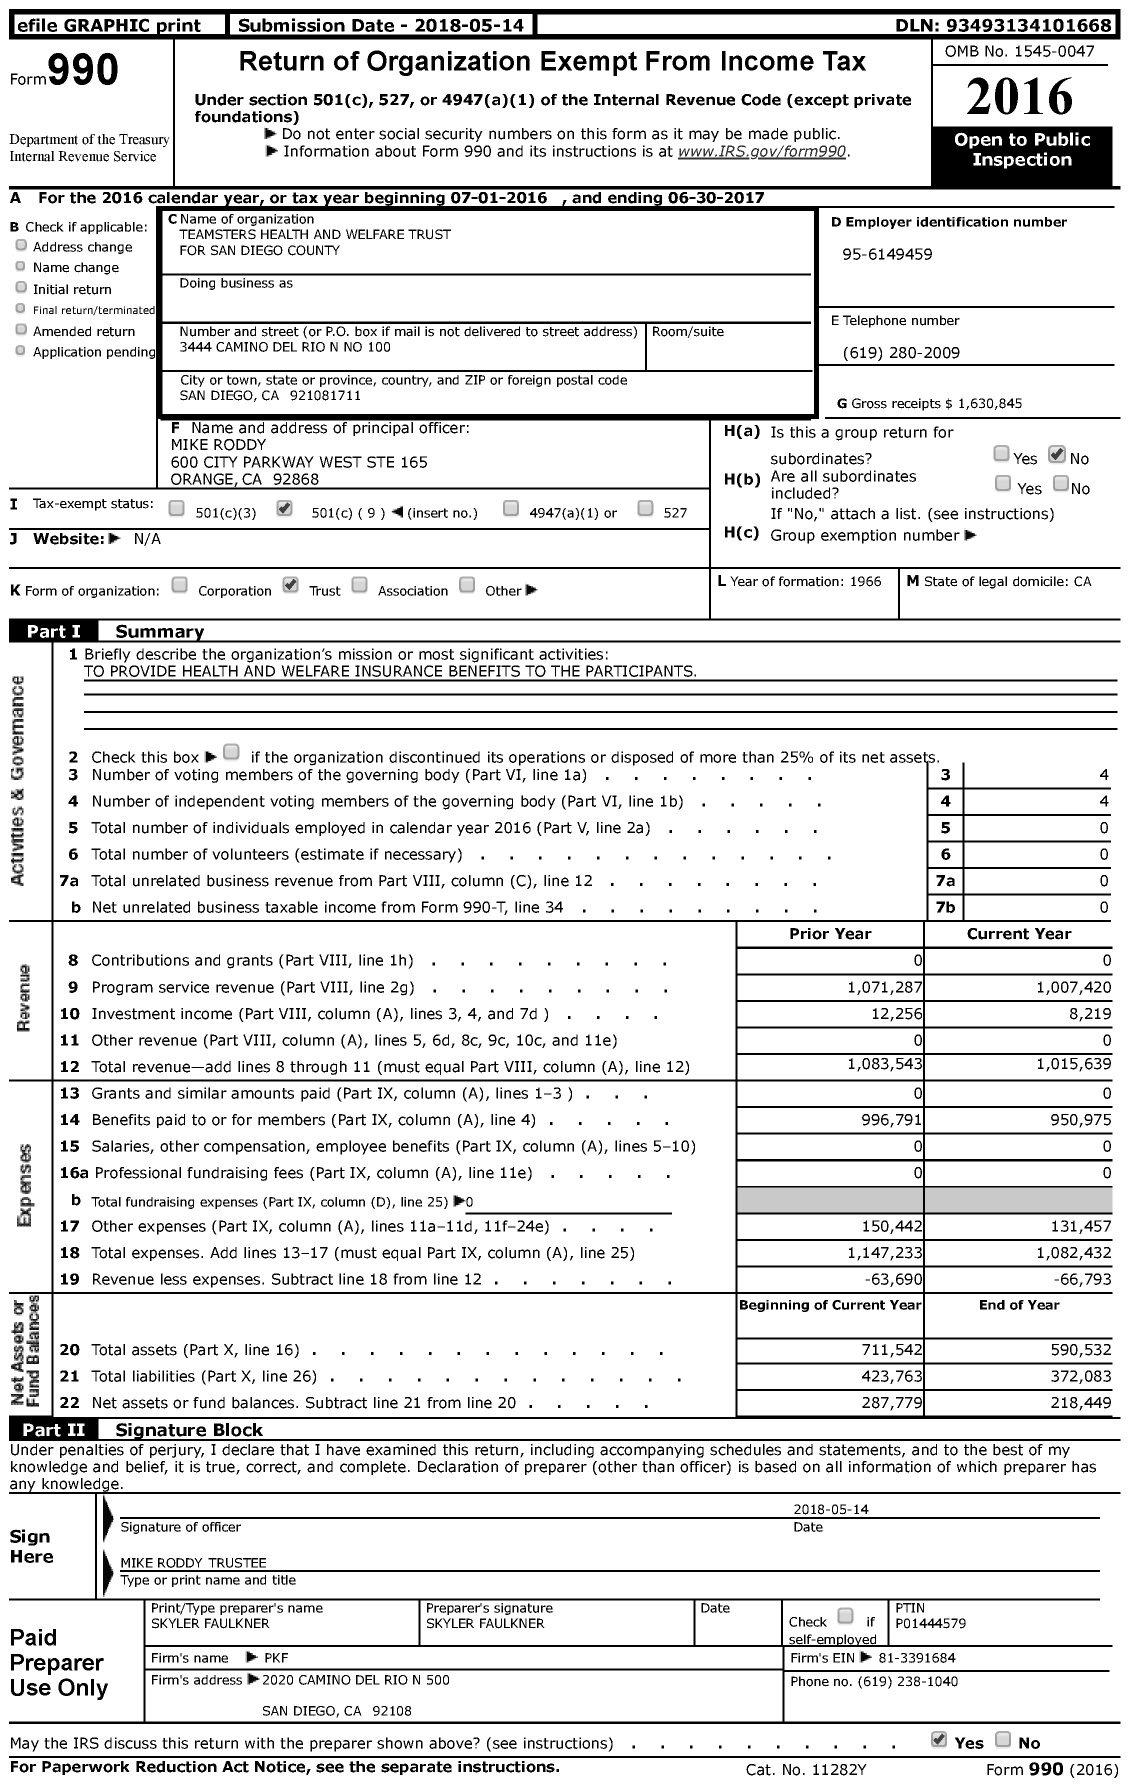 Image of first page of 2016 Form 990 for Teamsters Health and Welfare Trust for San Diego County